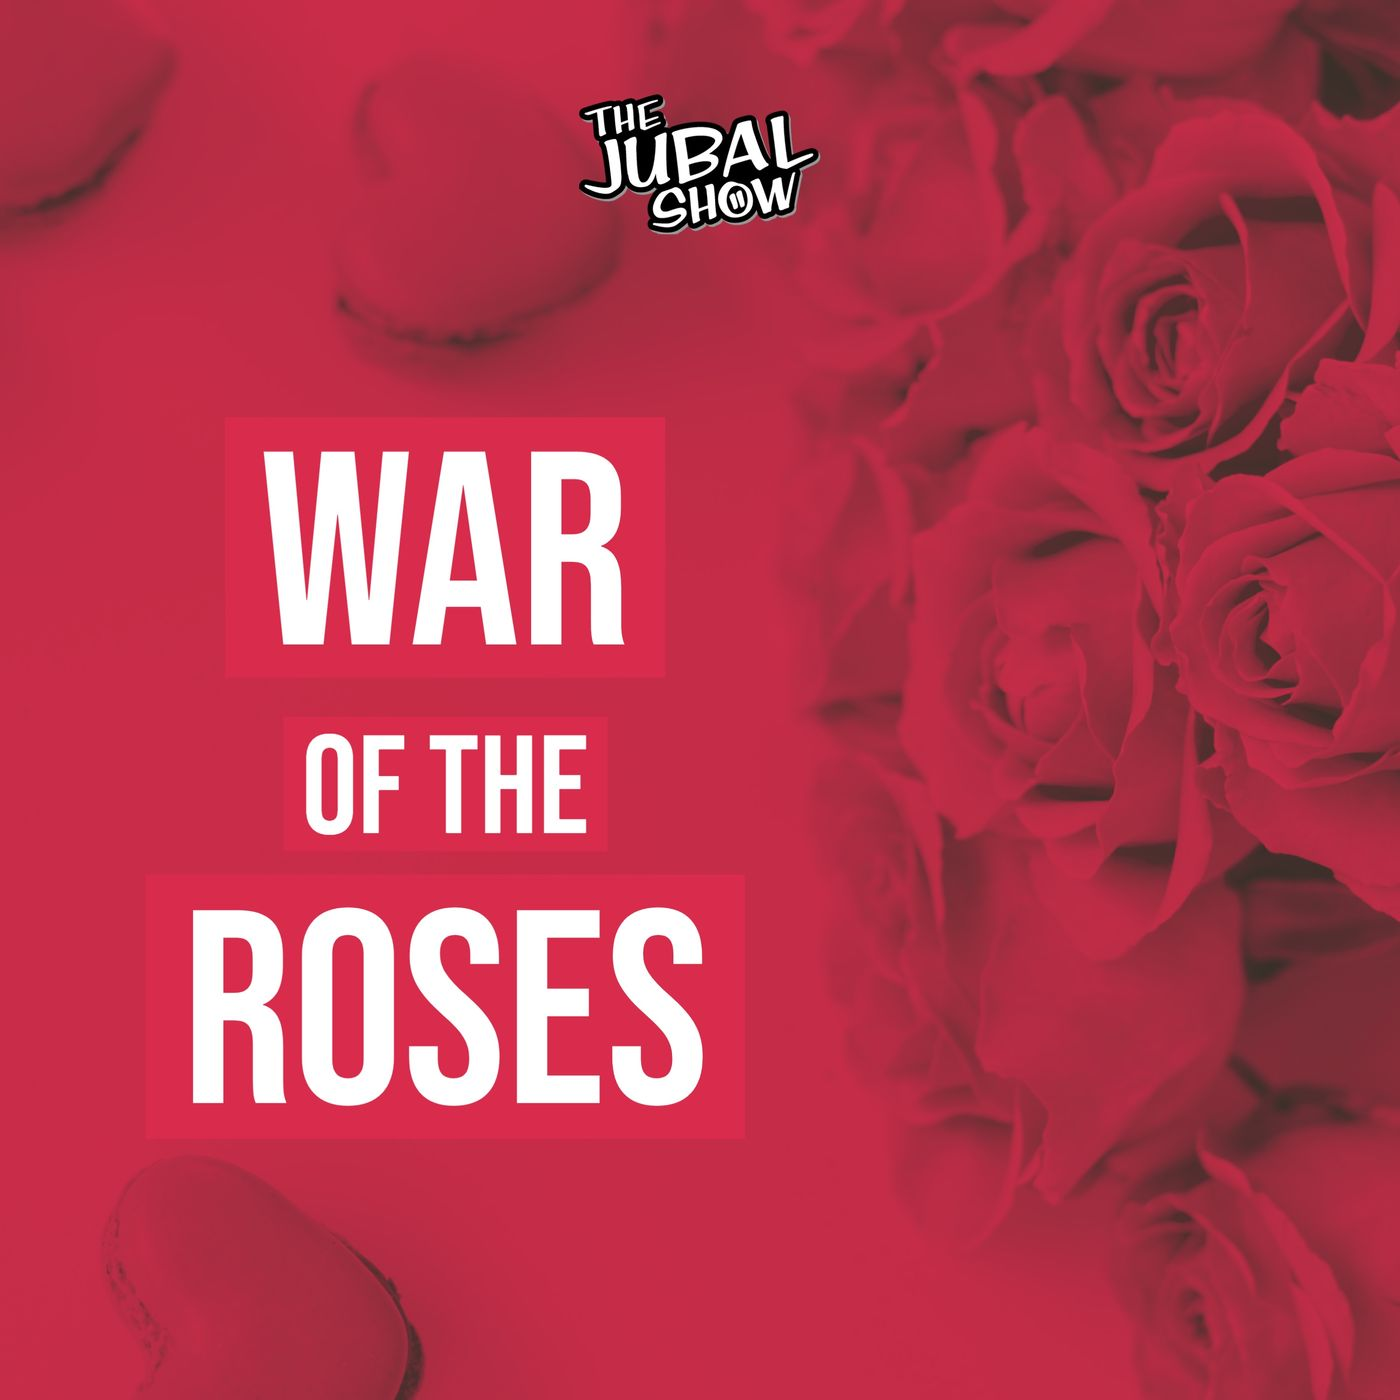 This War of the Roses might be a little taller, if you know what I'm saying!